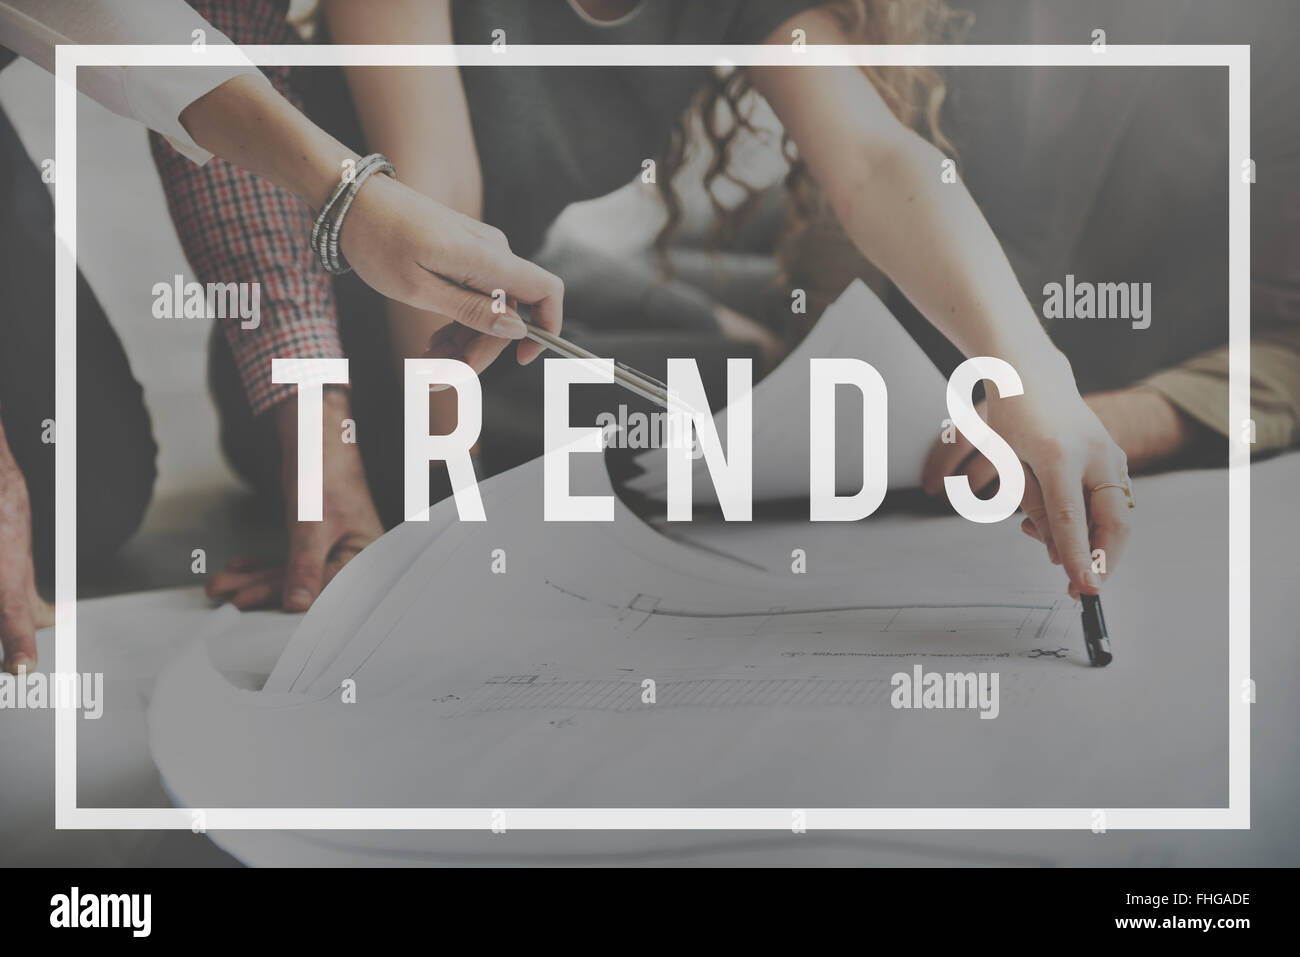 Trends Trendy Design Modern Style Concept Stock Photo